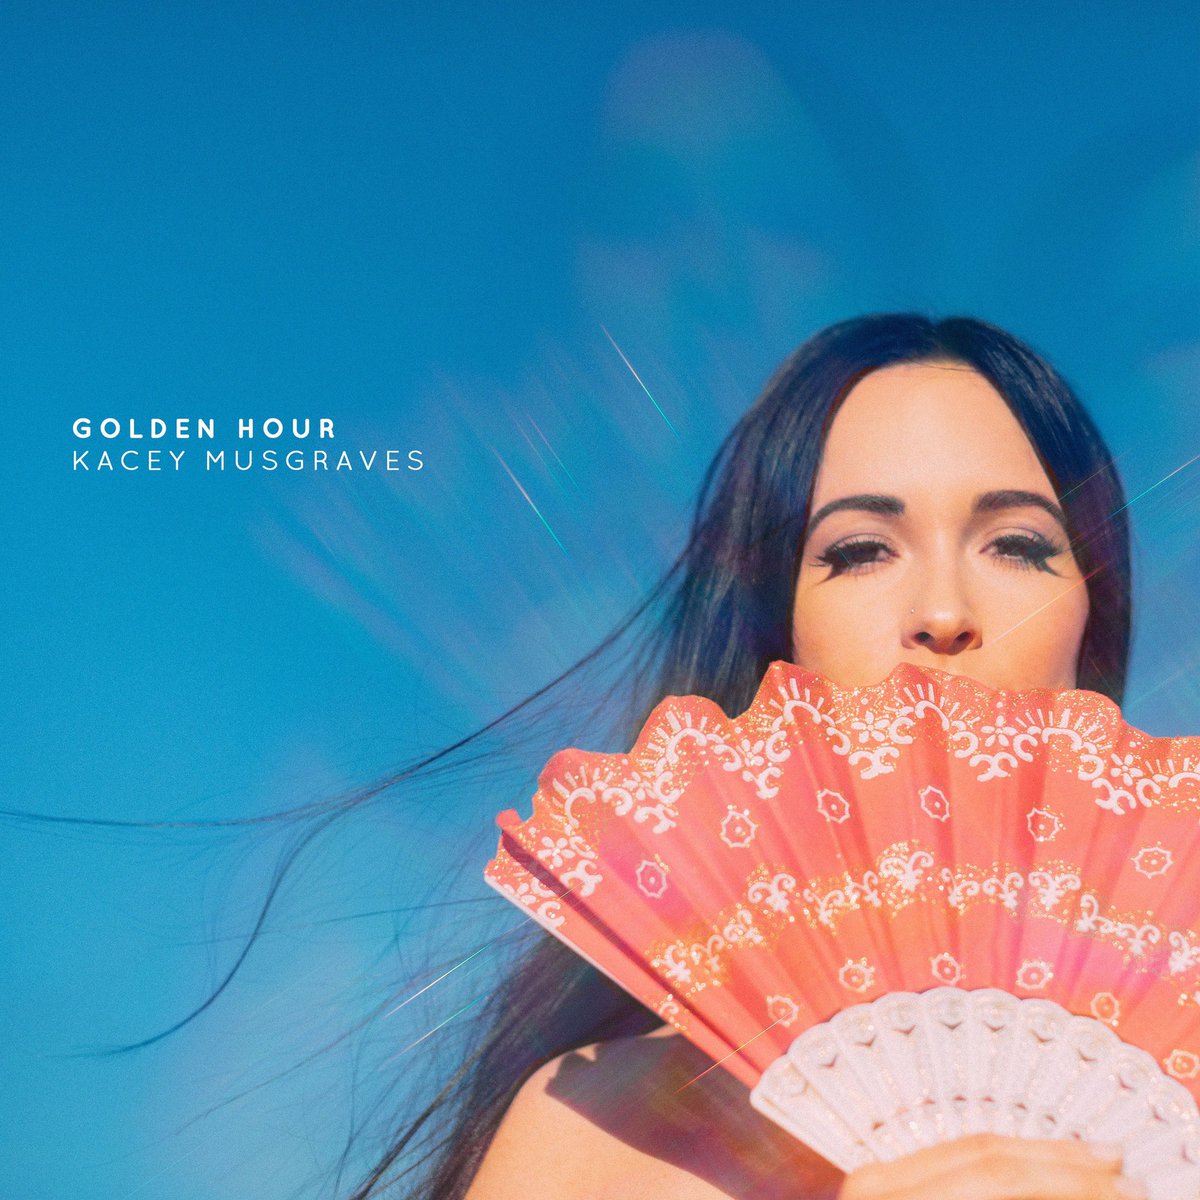 2018AOTY: Julia Holter - Aviary#2: Kacey Musgraves - Golden Hour#3: Kero Kero Bonito - Time ‘n’ Place#4: Against All Logic - 2012 - 2017Total: 103